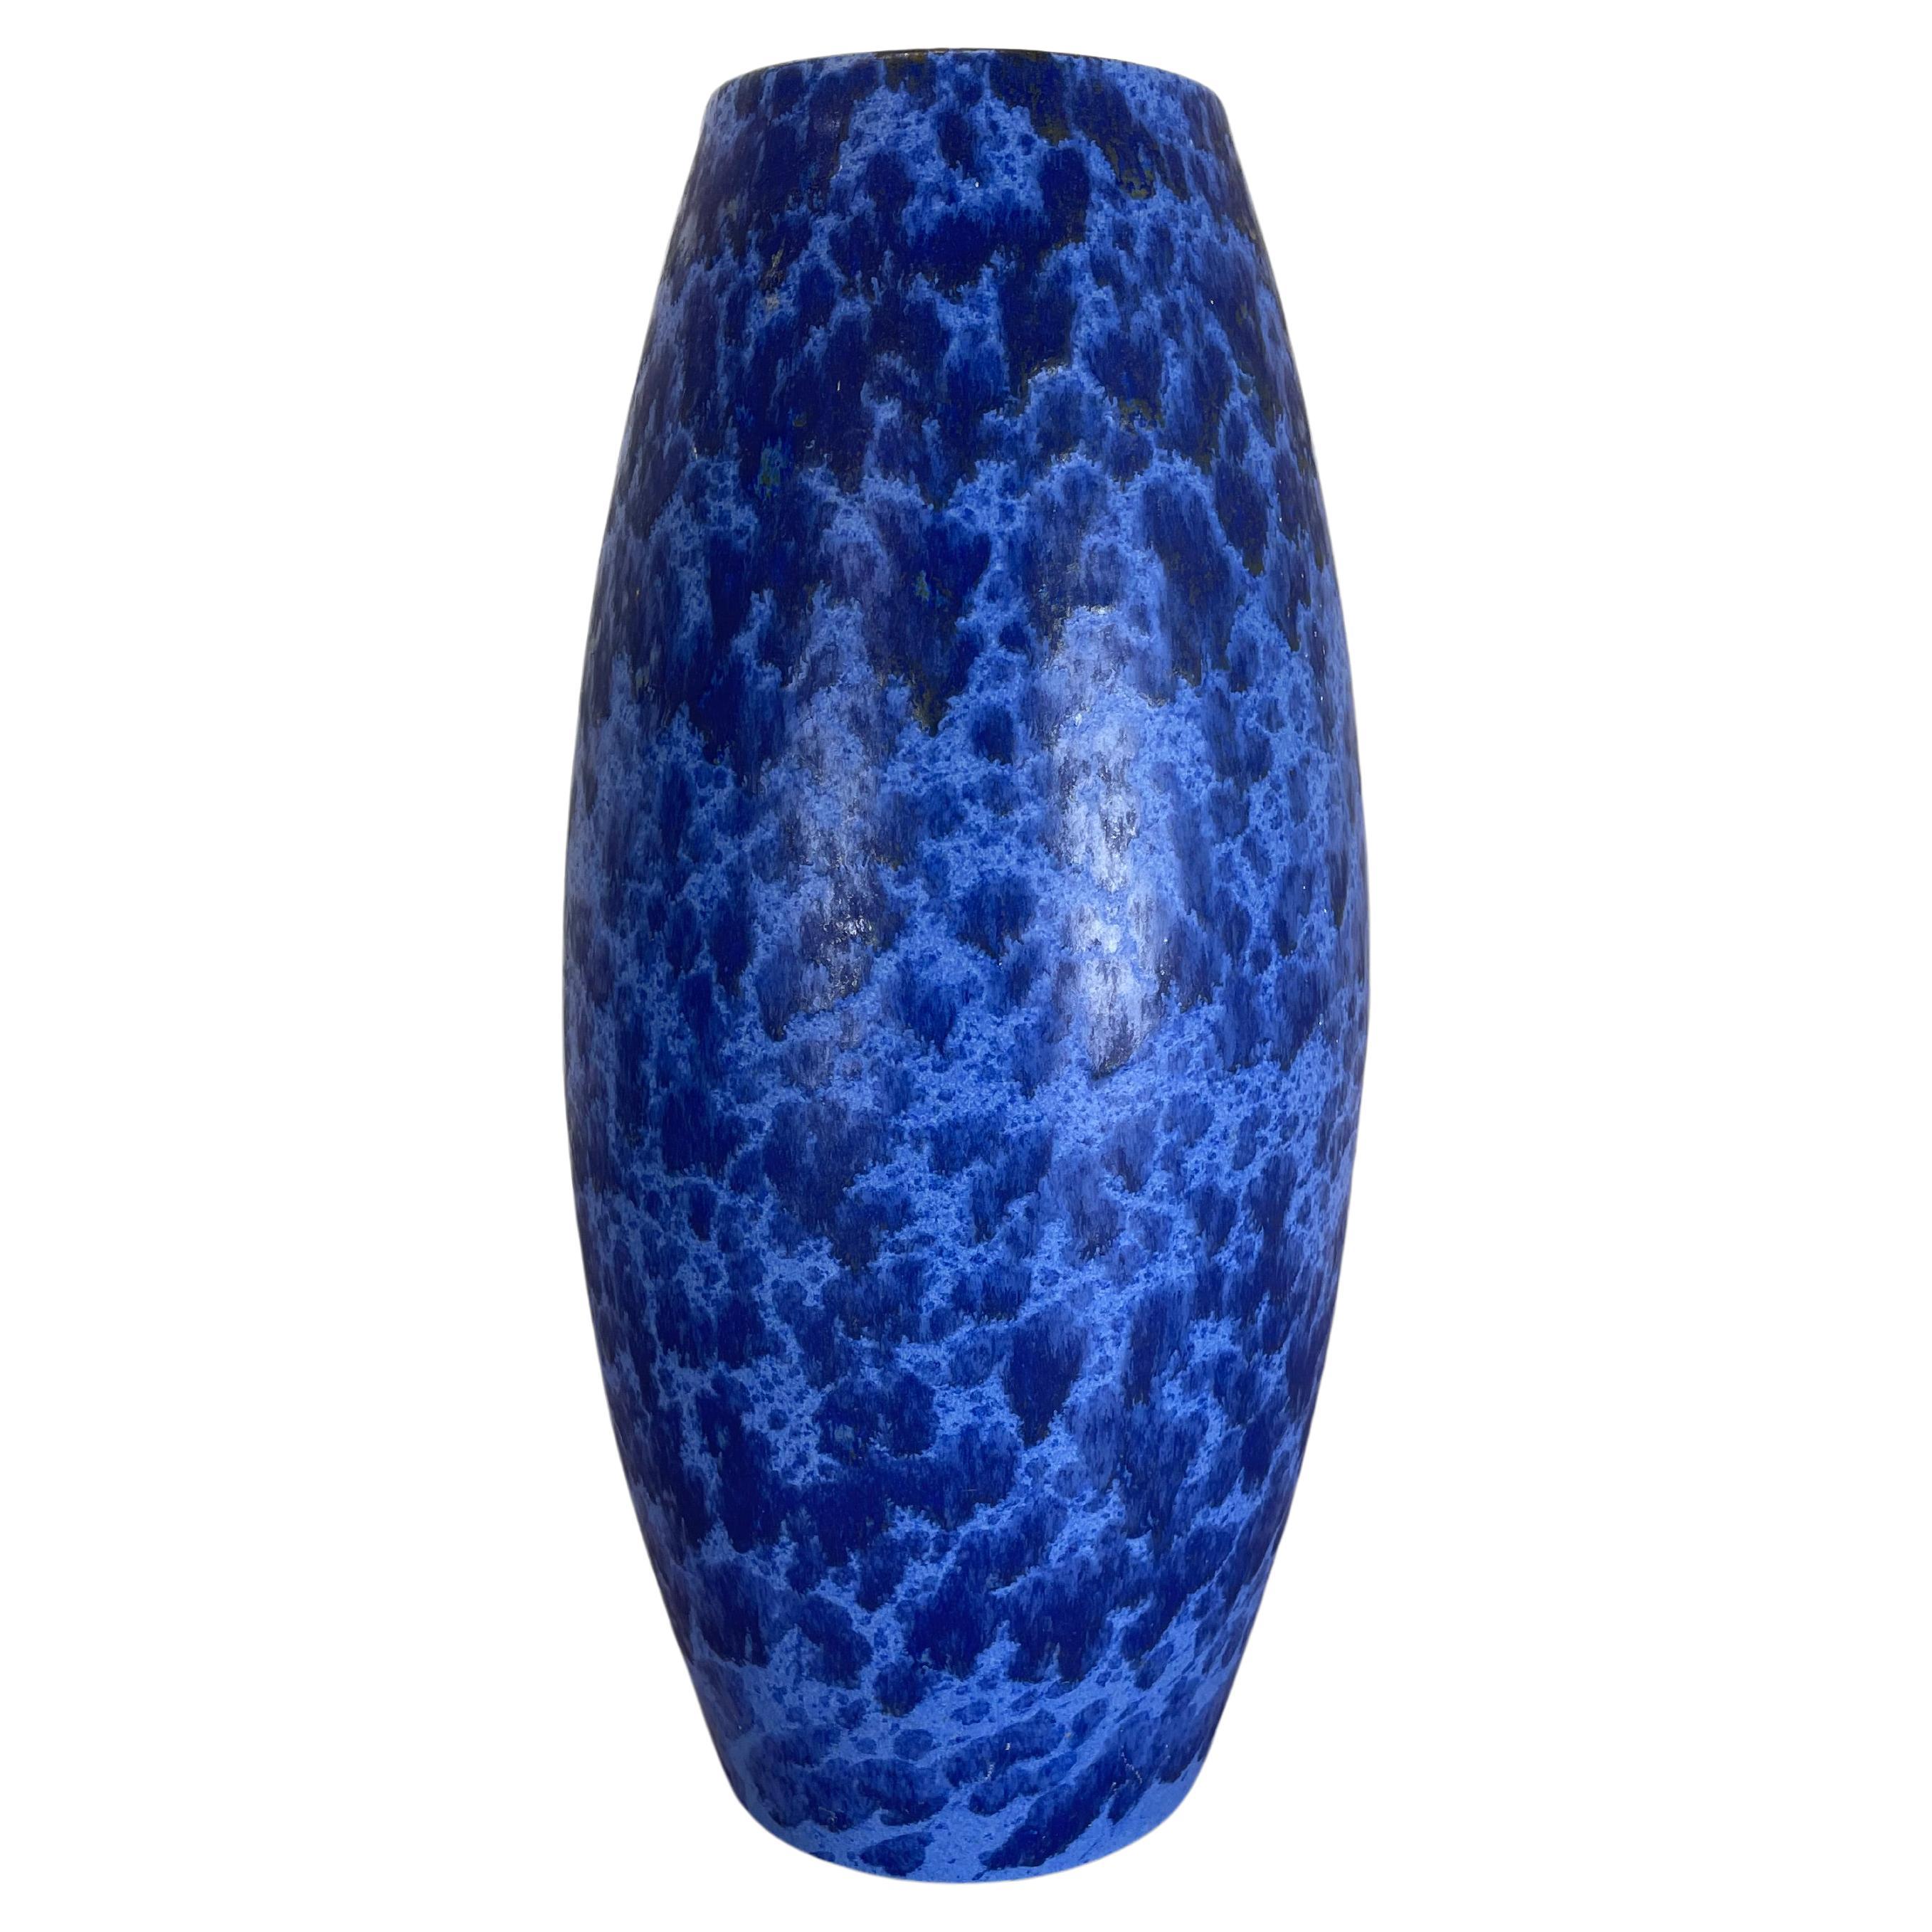 Large 38cm Pottery Fat Lava "blue-blue" Floor Vase Made by Scheurich, 1970s For Sale